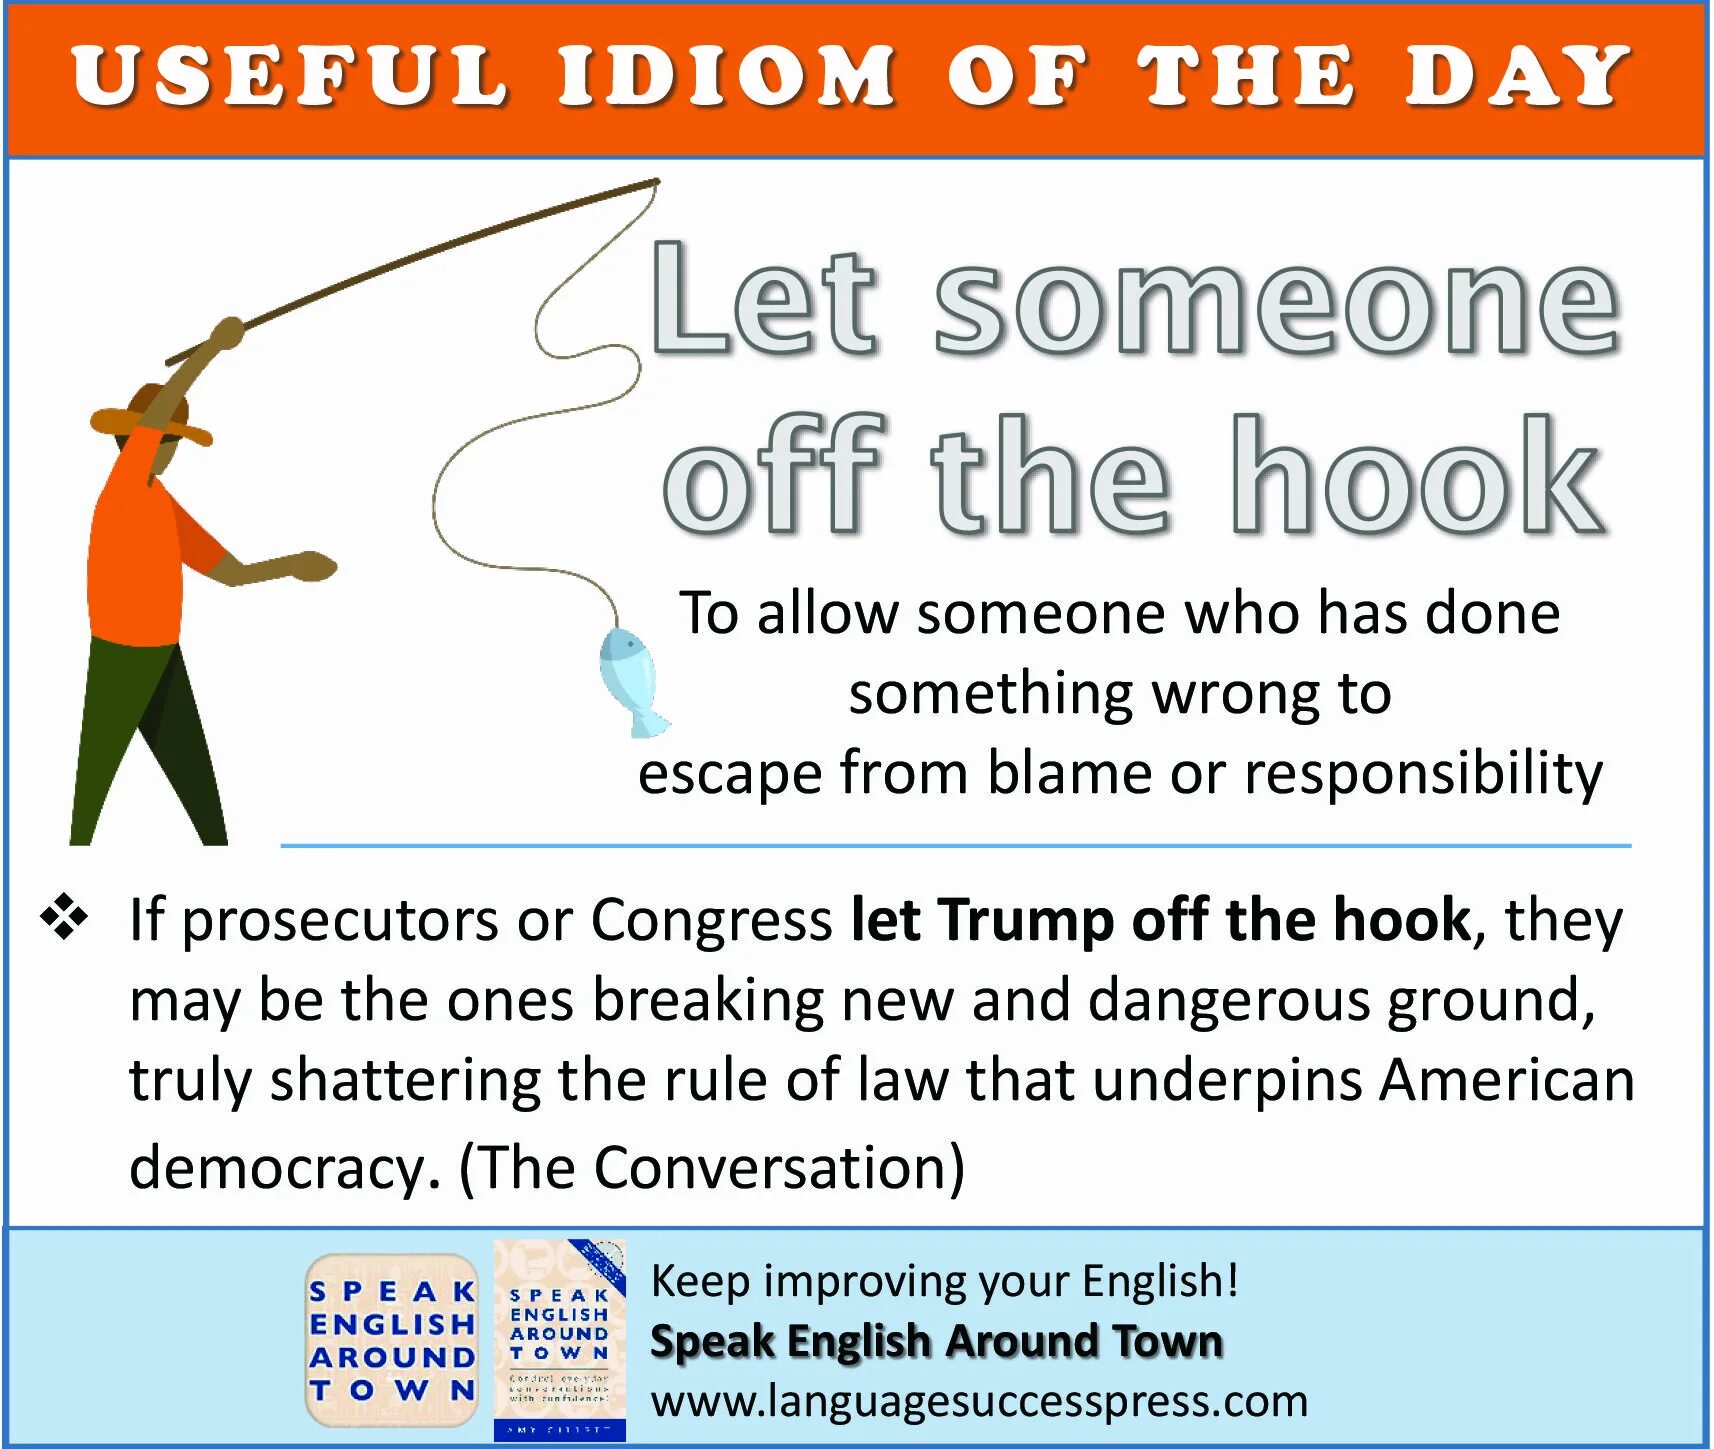 Let someone off the Hook. Ship someone off идиома. Useful idioms. Fly someone off идиома пример.